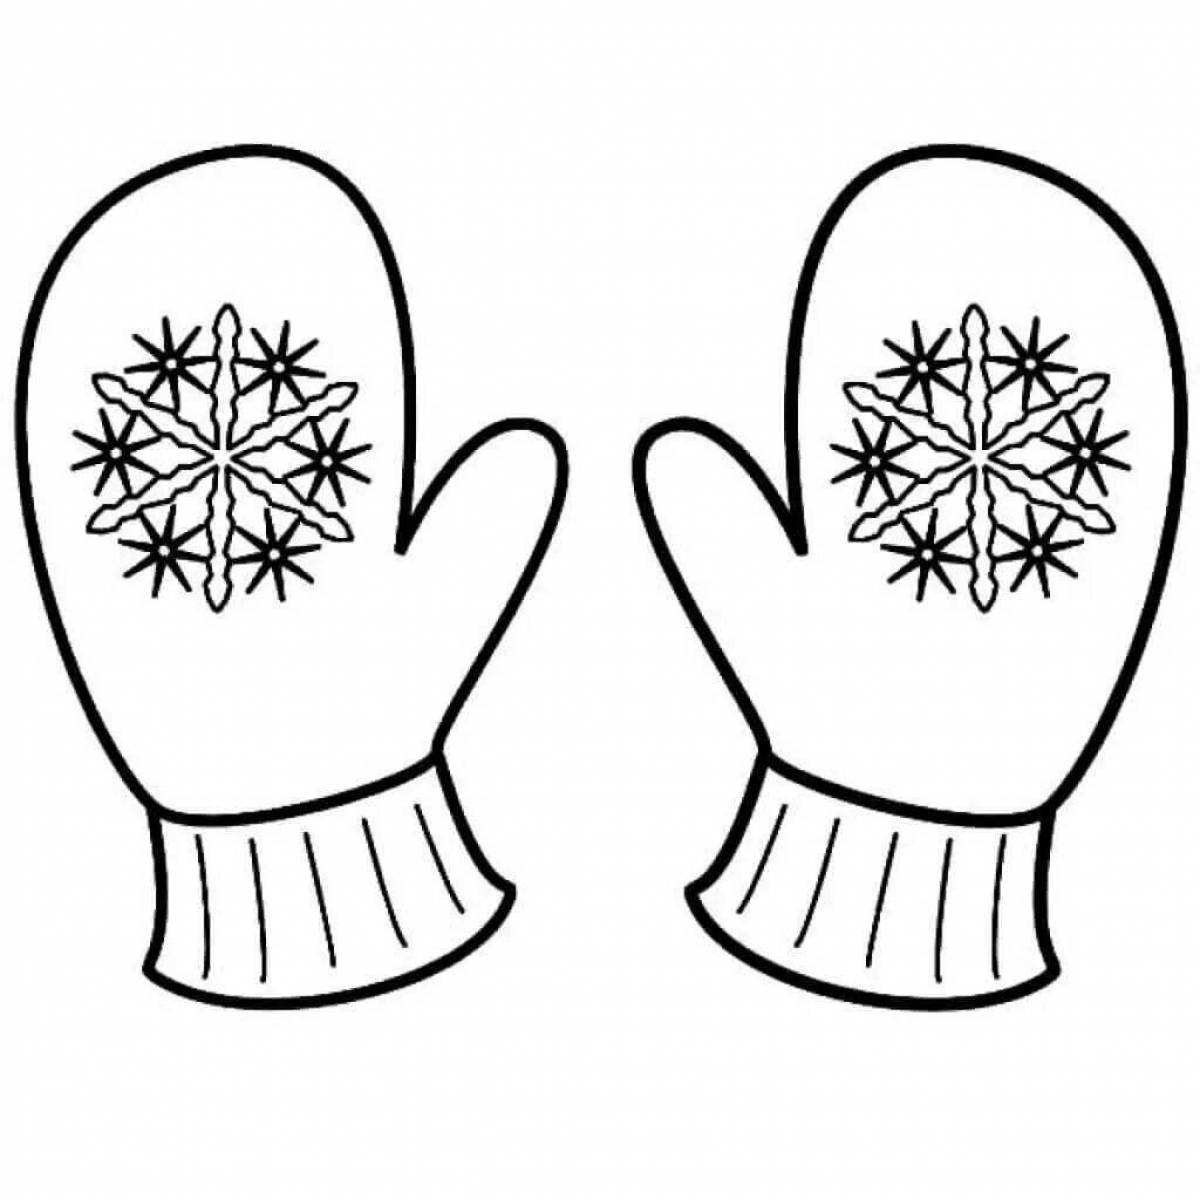 Sweet mittens coloring for children 5-6 years old